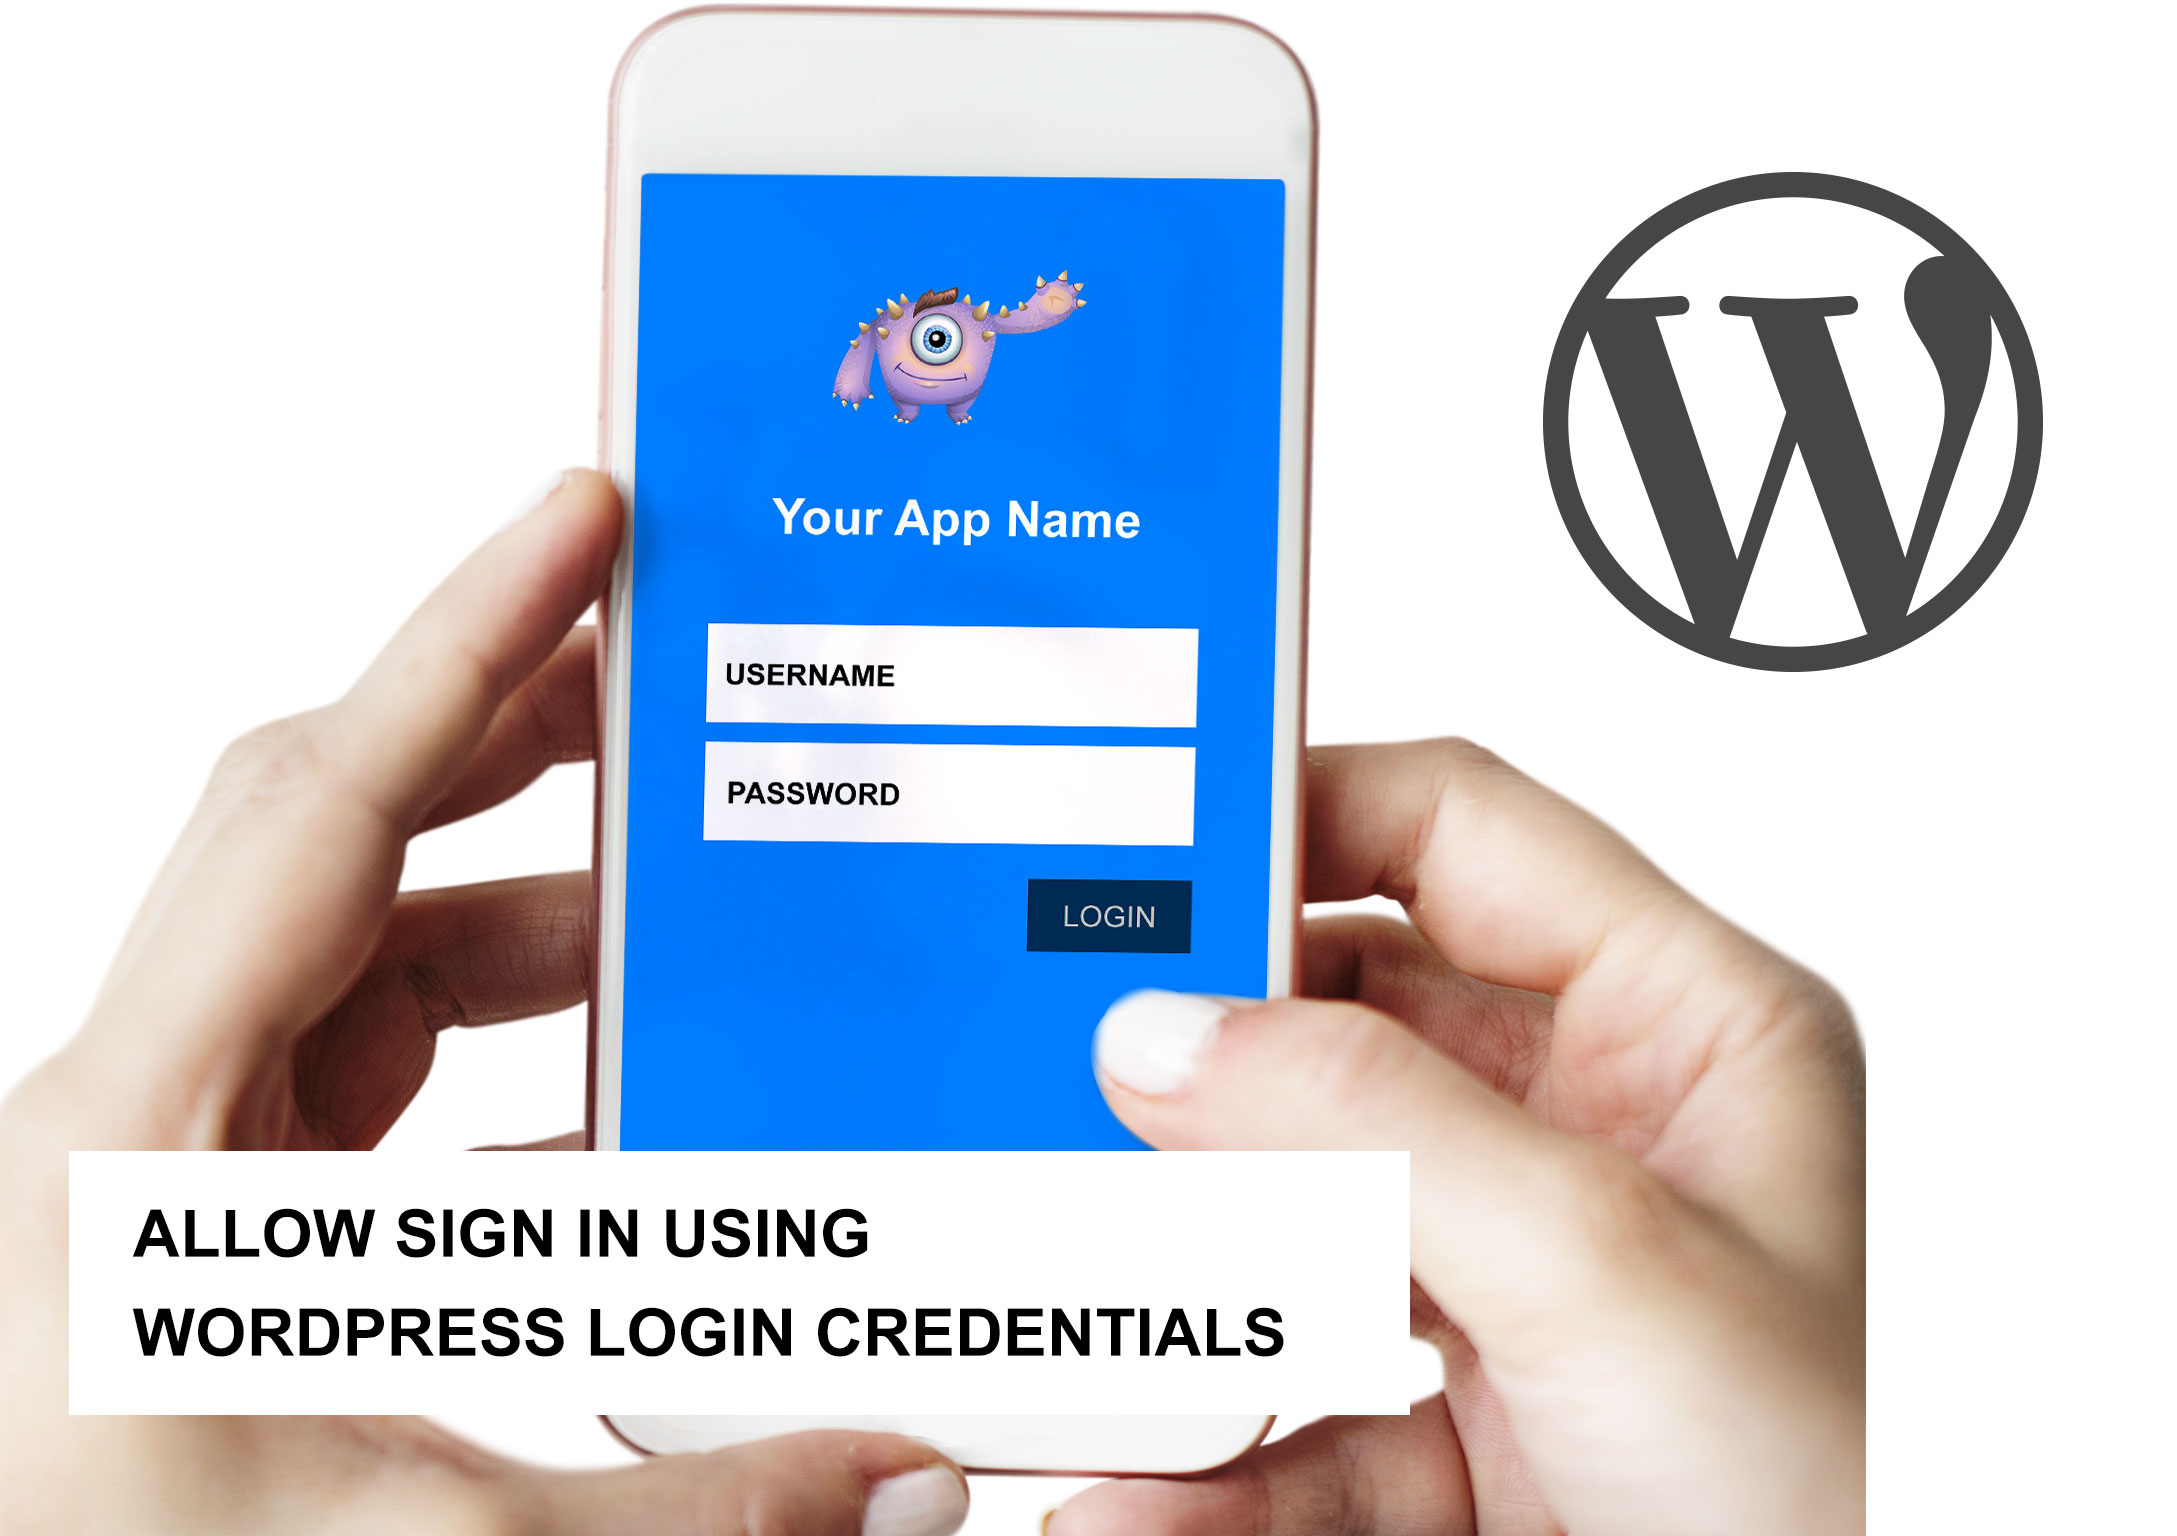 Log in to a mobile app using WordPress Credentials.